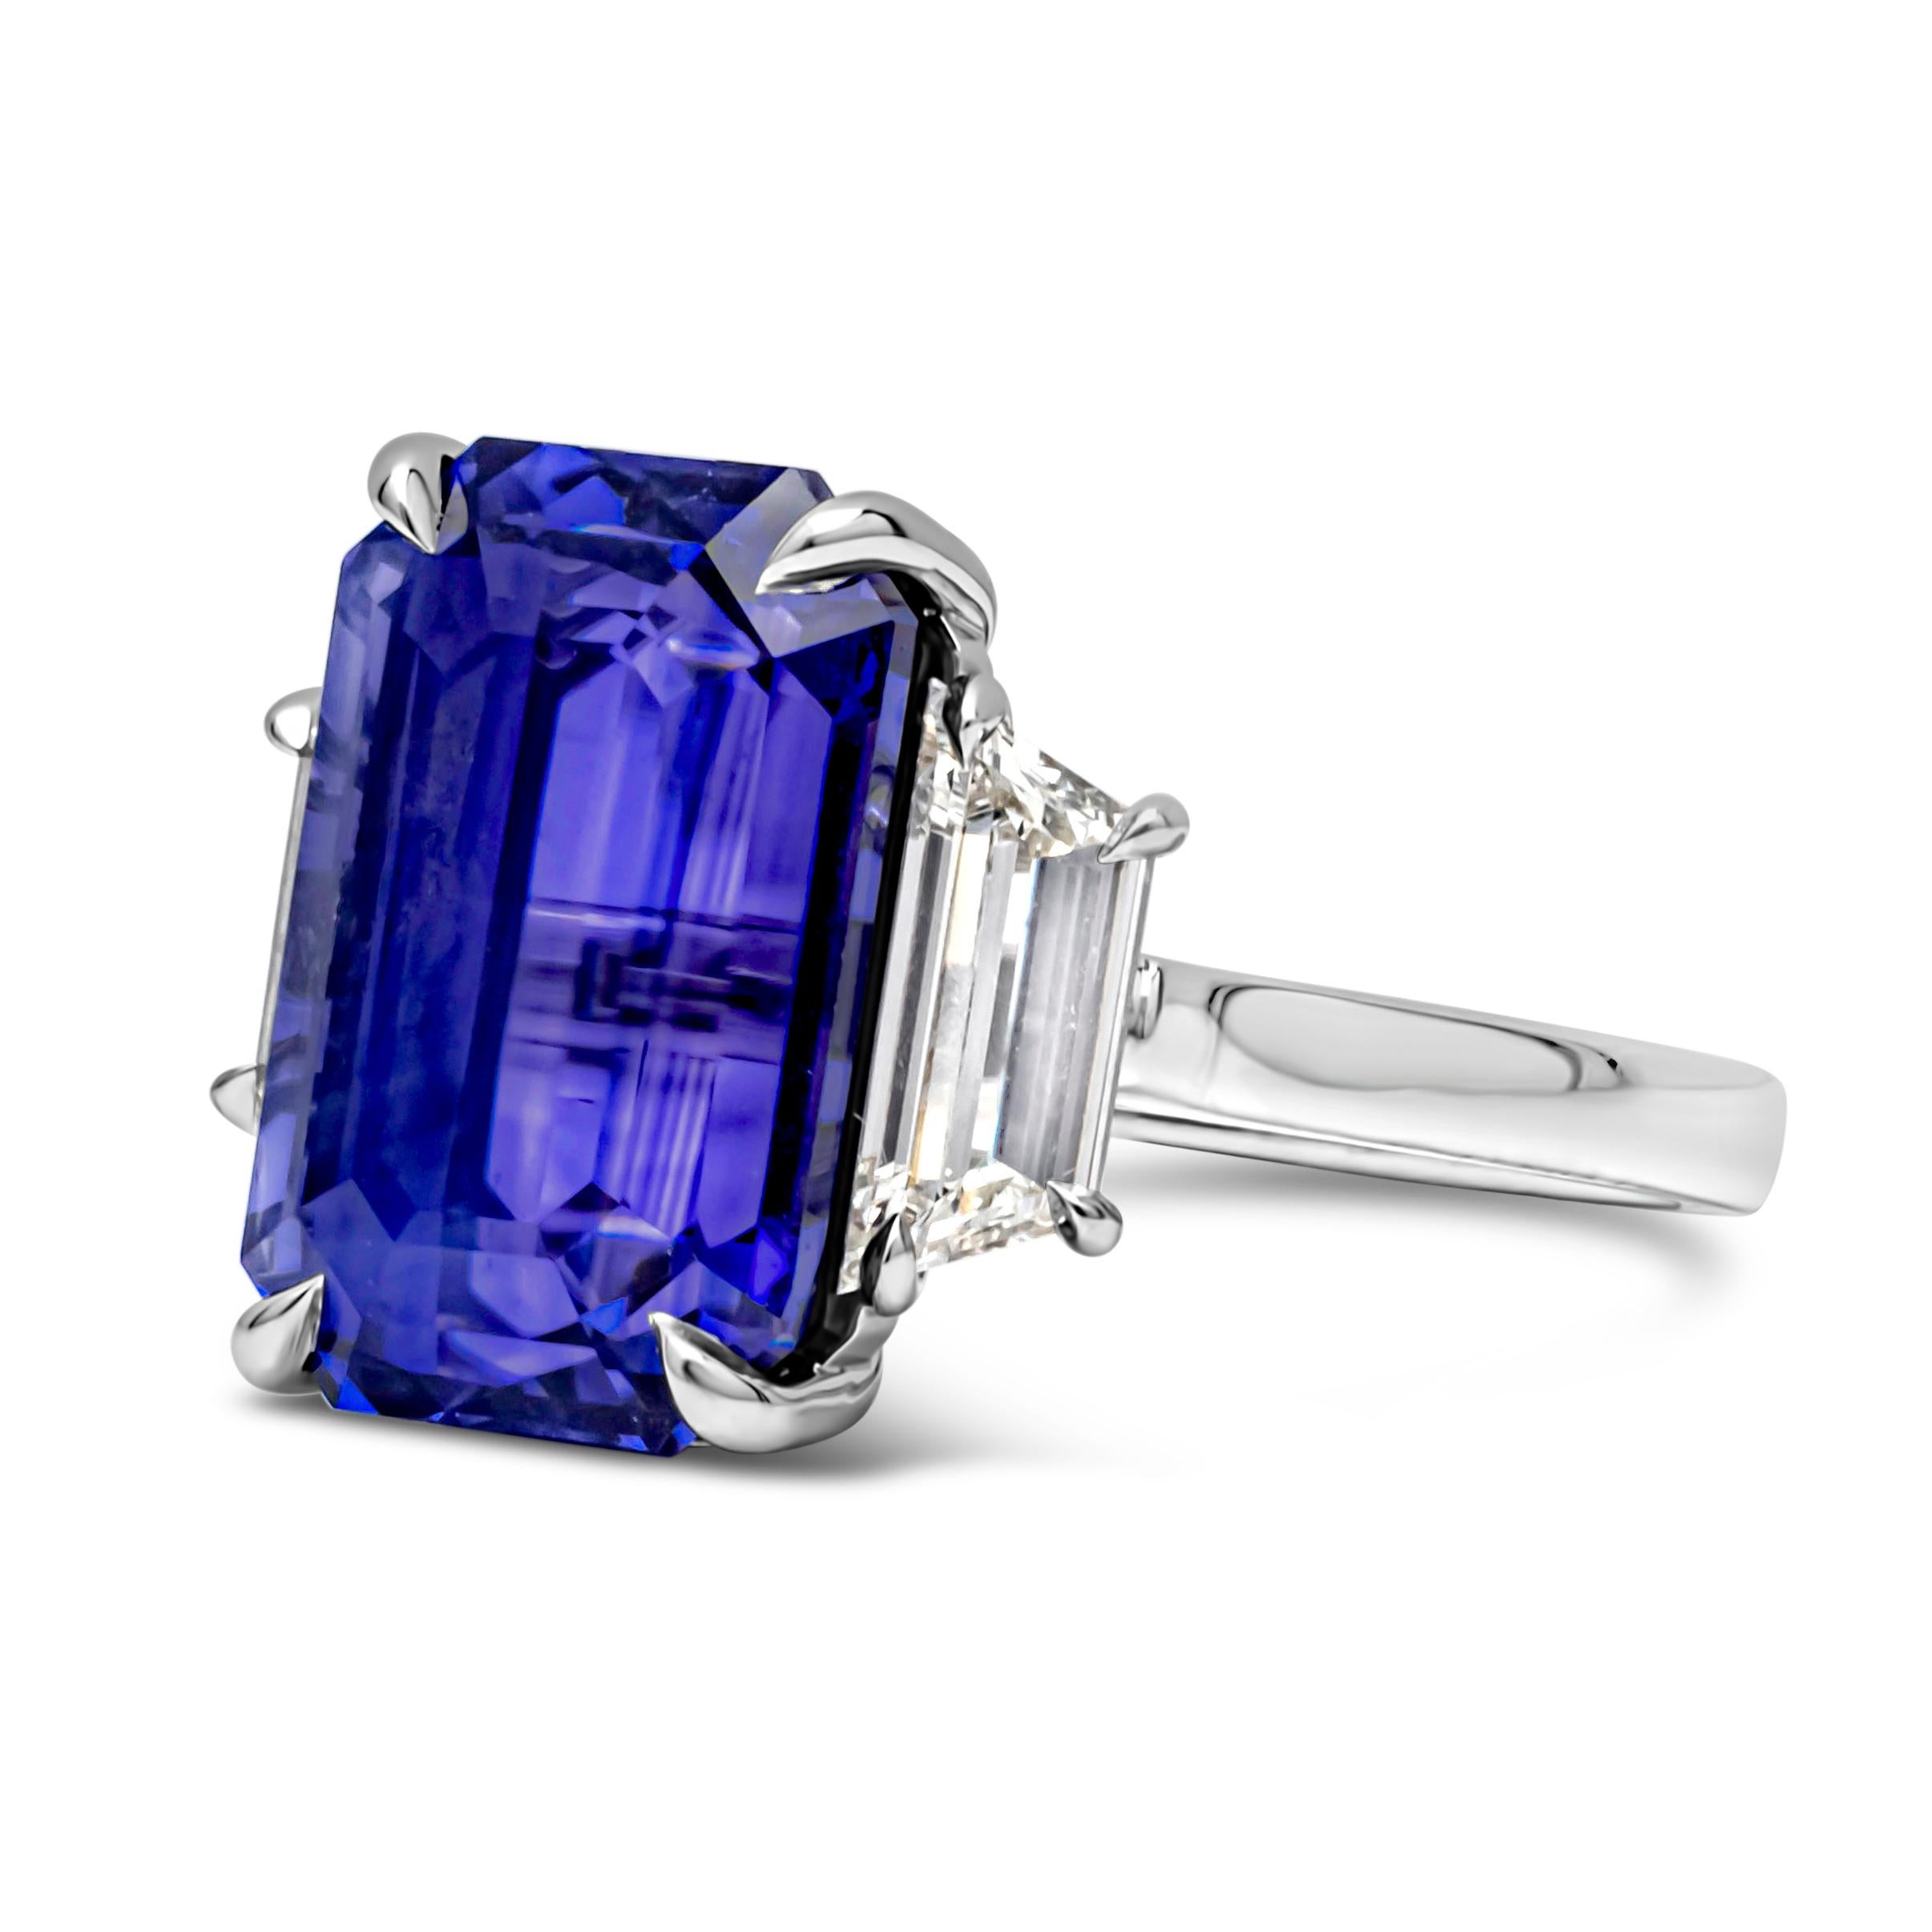 Elegant and well crafted three stone ring features a 10.62 carats emerald cut no-heated color change gemstone blue to purple sapphire certified by GRS as B-P color, set in a classic platinum four prong basket setting. Flanked by two trapezoid